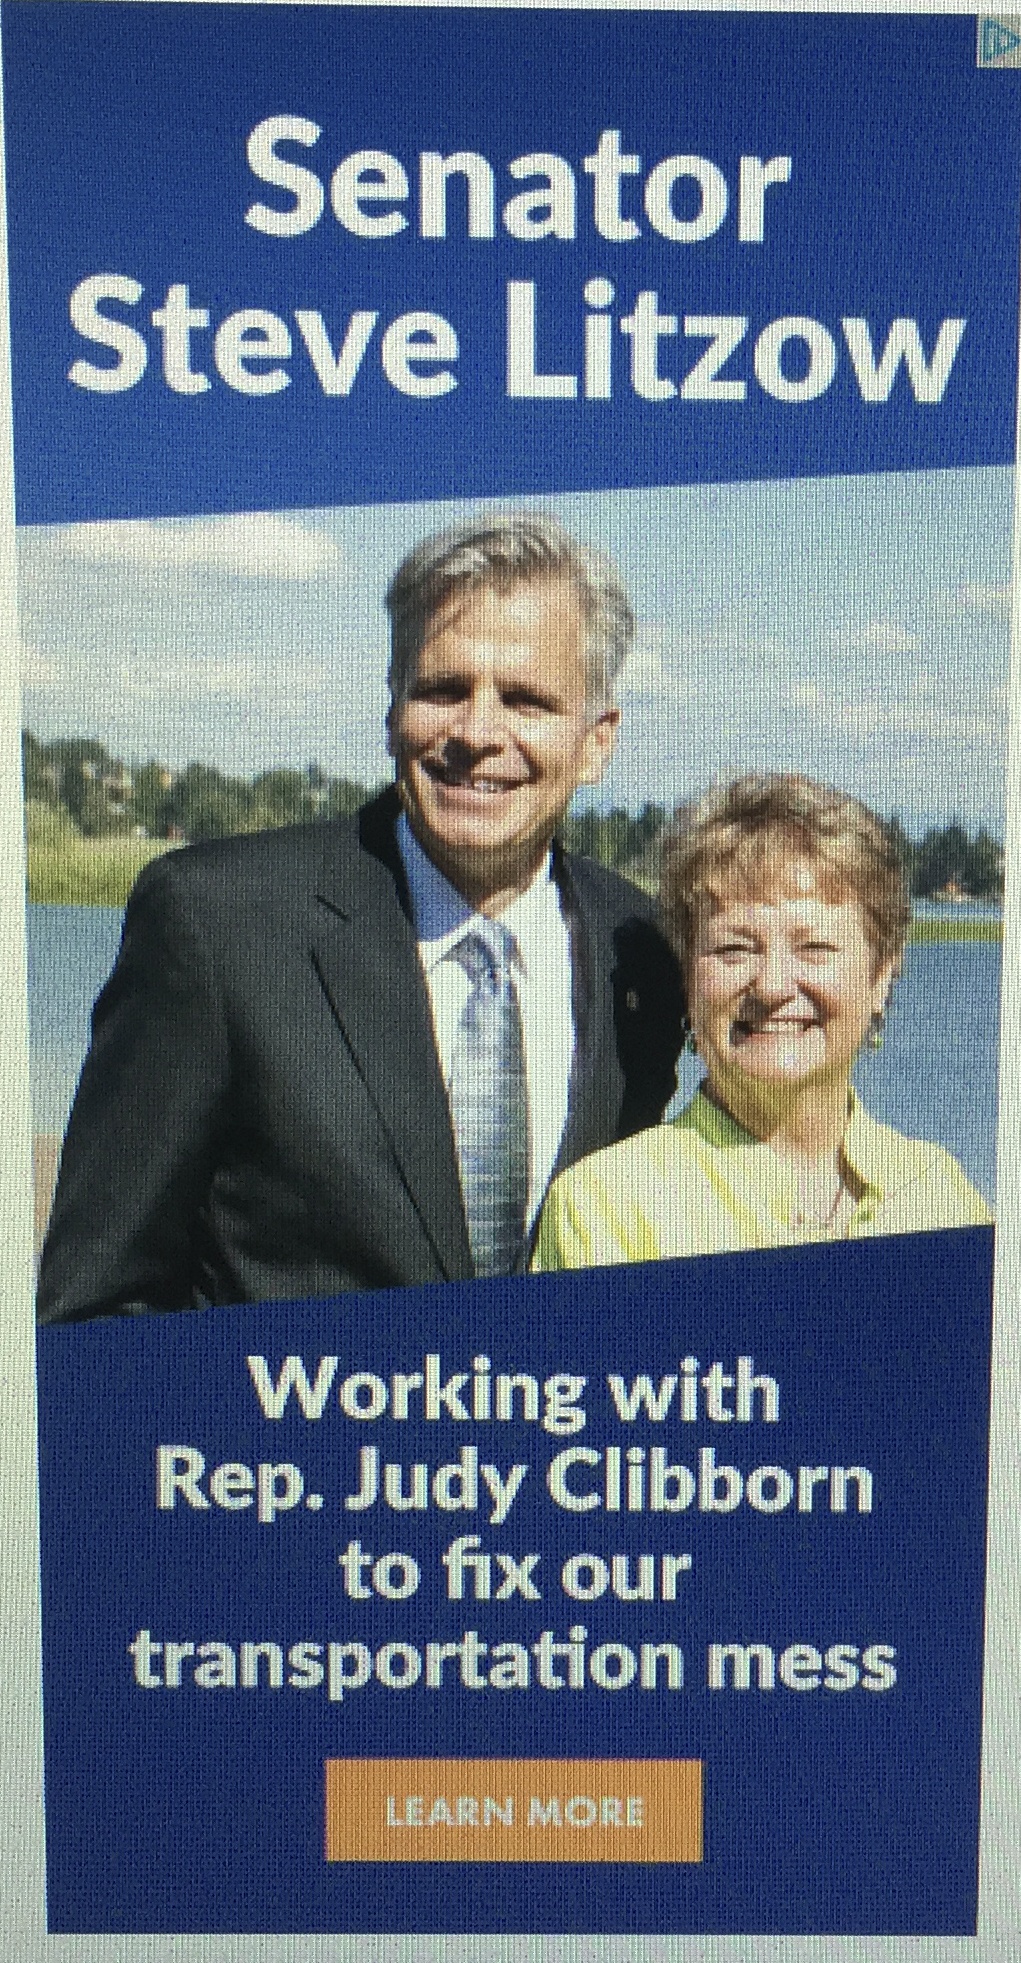 This is one of the advertisements used by the Steve Litzow campaign. A PDC complaint was filed against Litzow for using Judy Clibborn’s name and photos without permission. Contributed photo